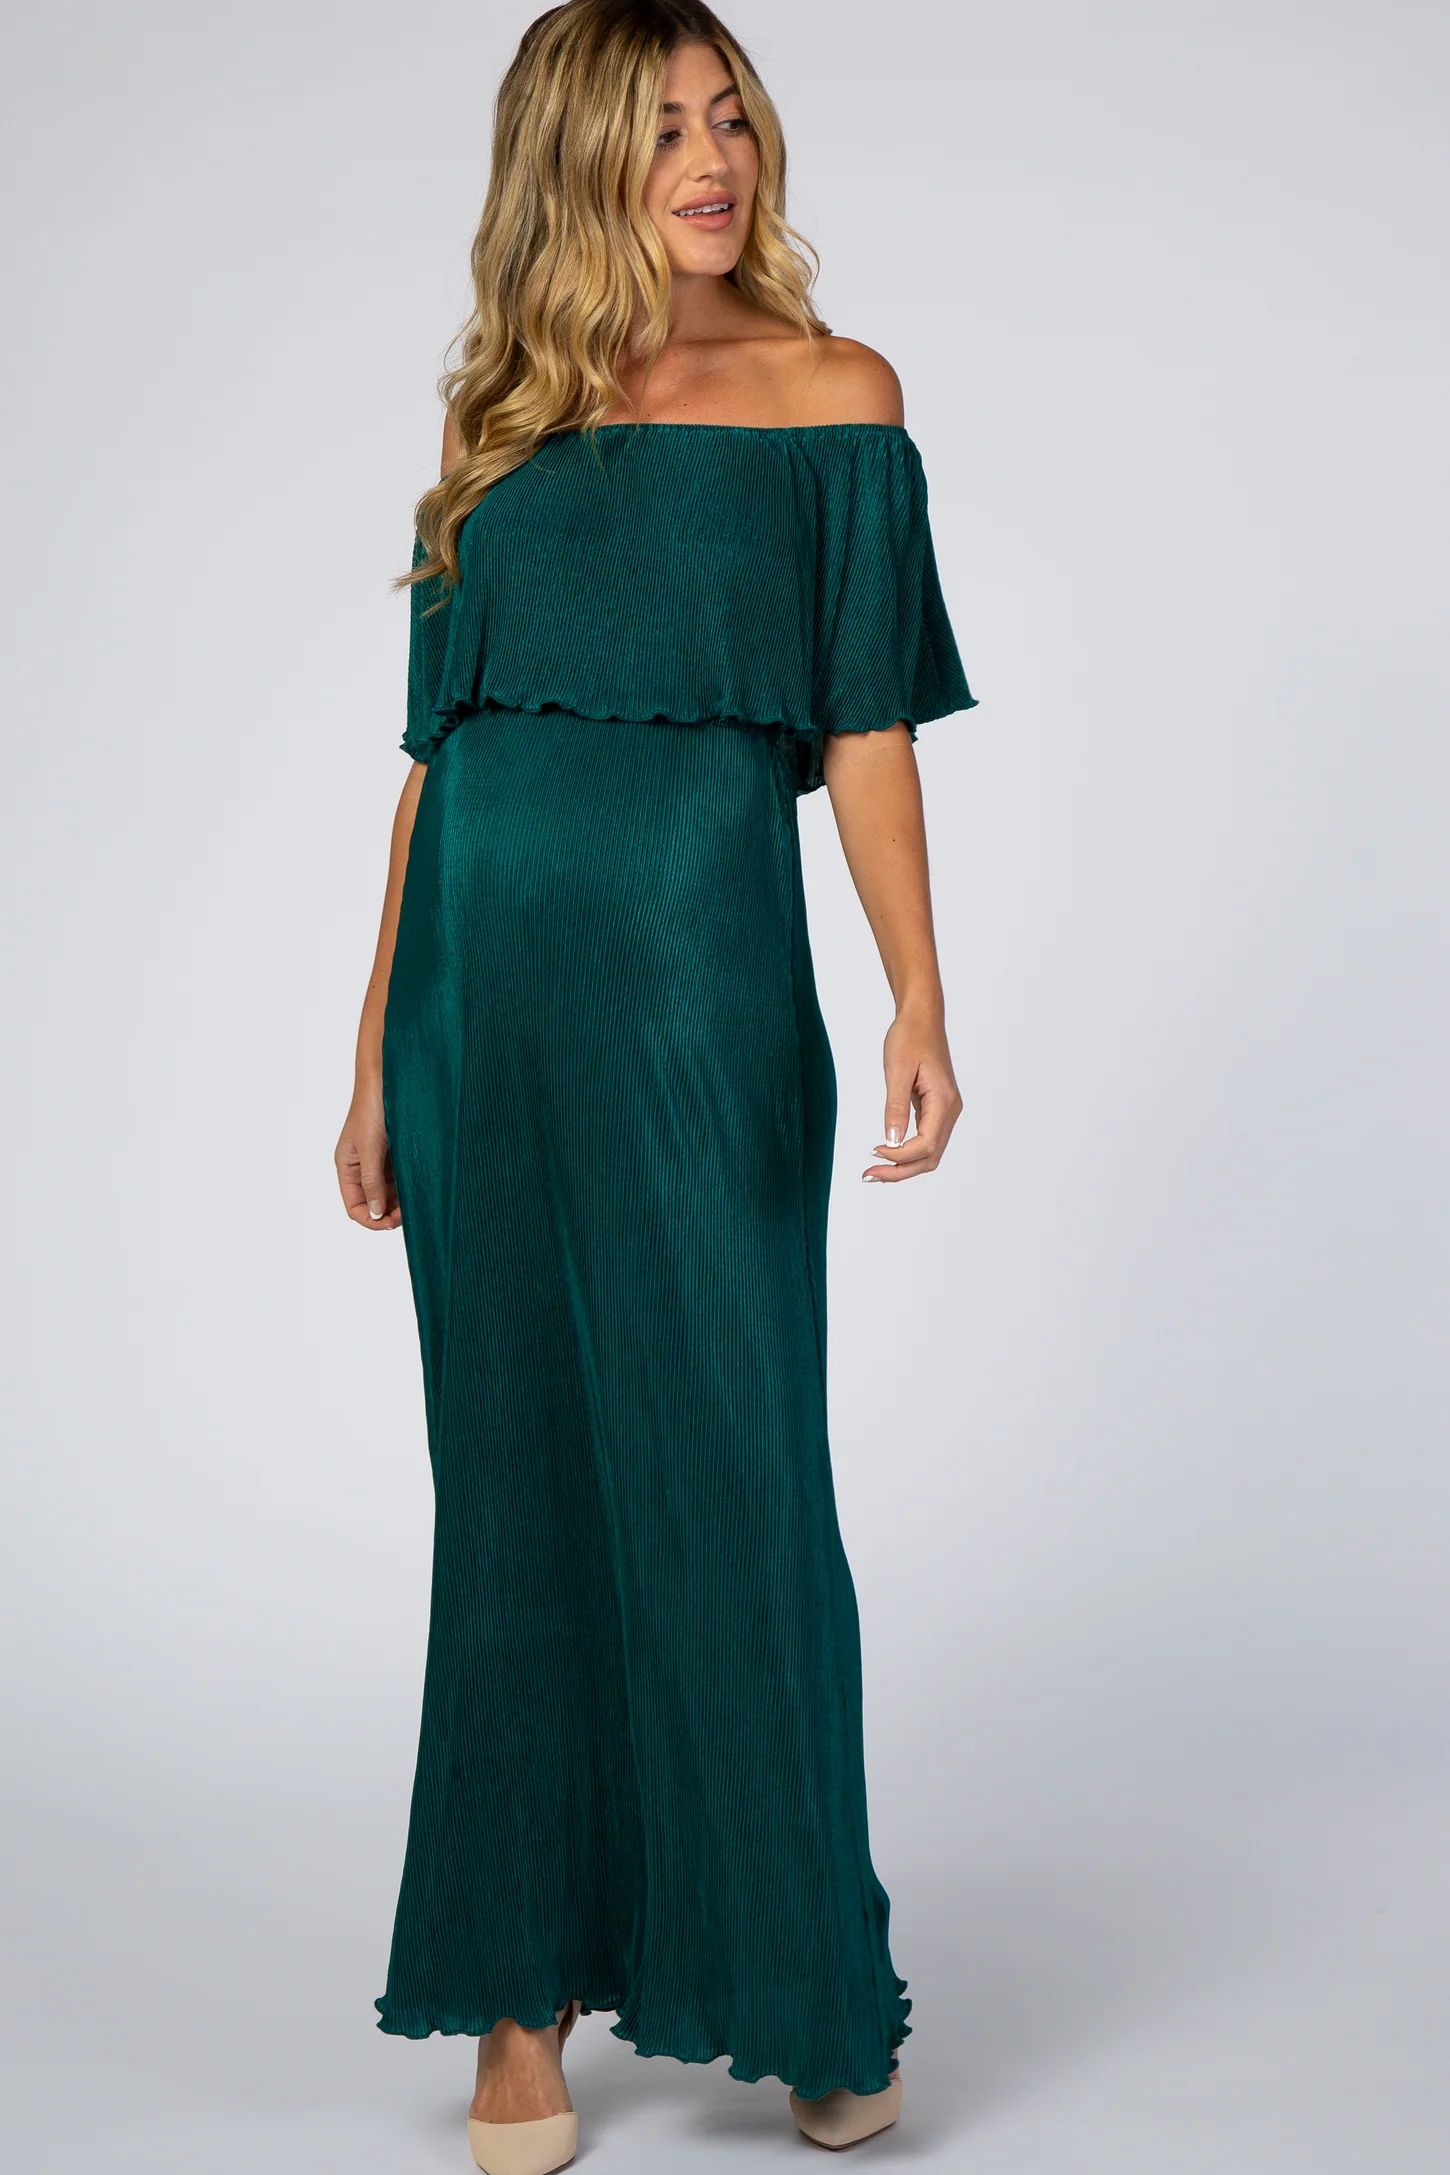 Forest Green Pleated Ruffle Off Shoulder Maternity Maxi Dress | PinkBlush Maternity